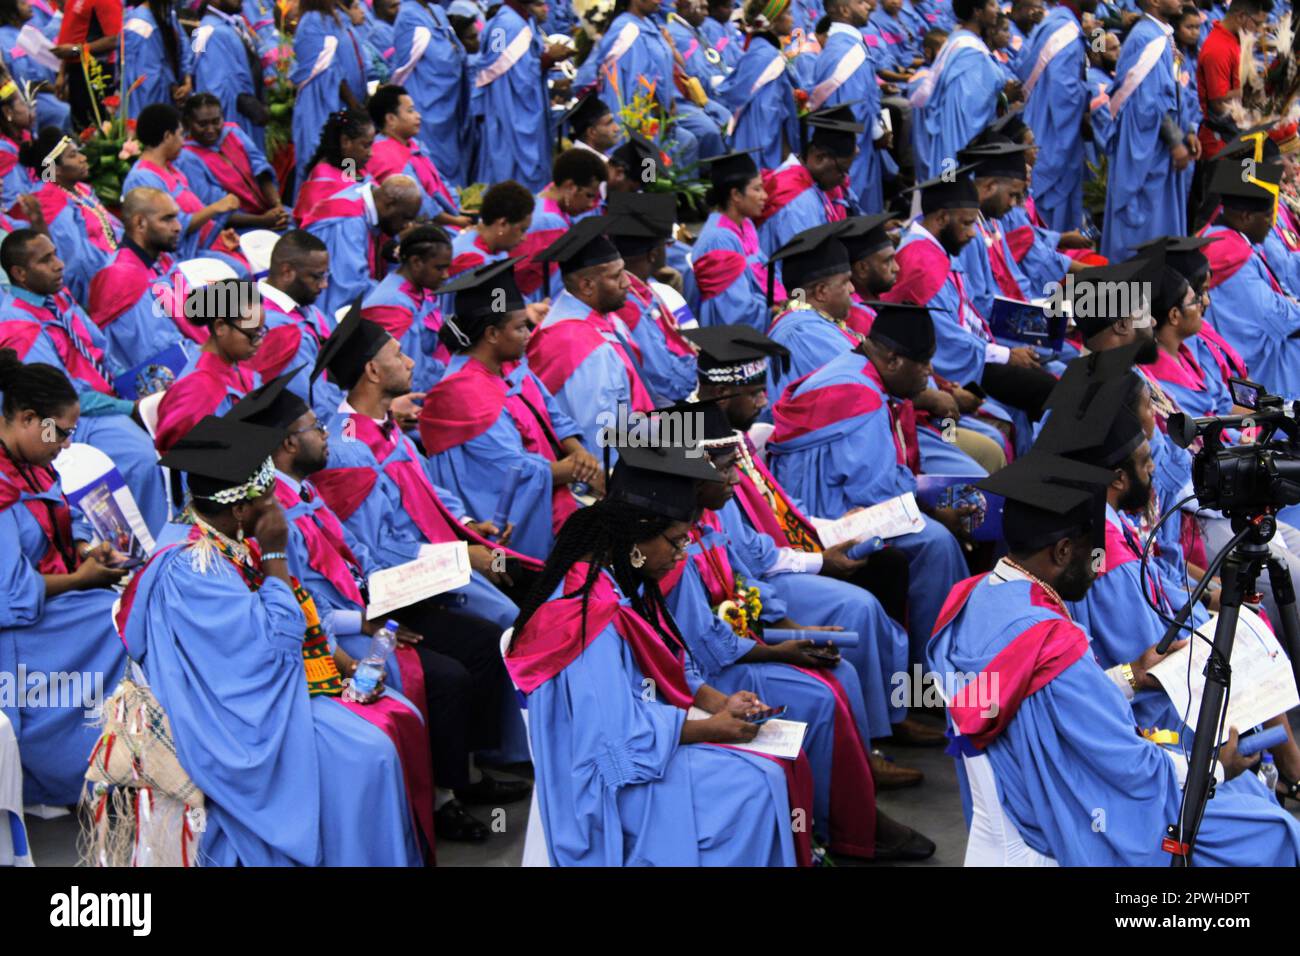 Graduating post-graduate students from the University of Papua New Guinea's (UPNG) School of Medicine and Health Sciences (SMHS) listening to speakers. Stock Photo